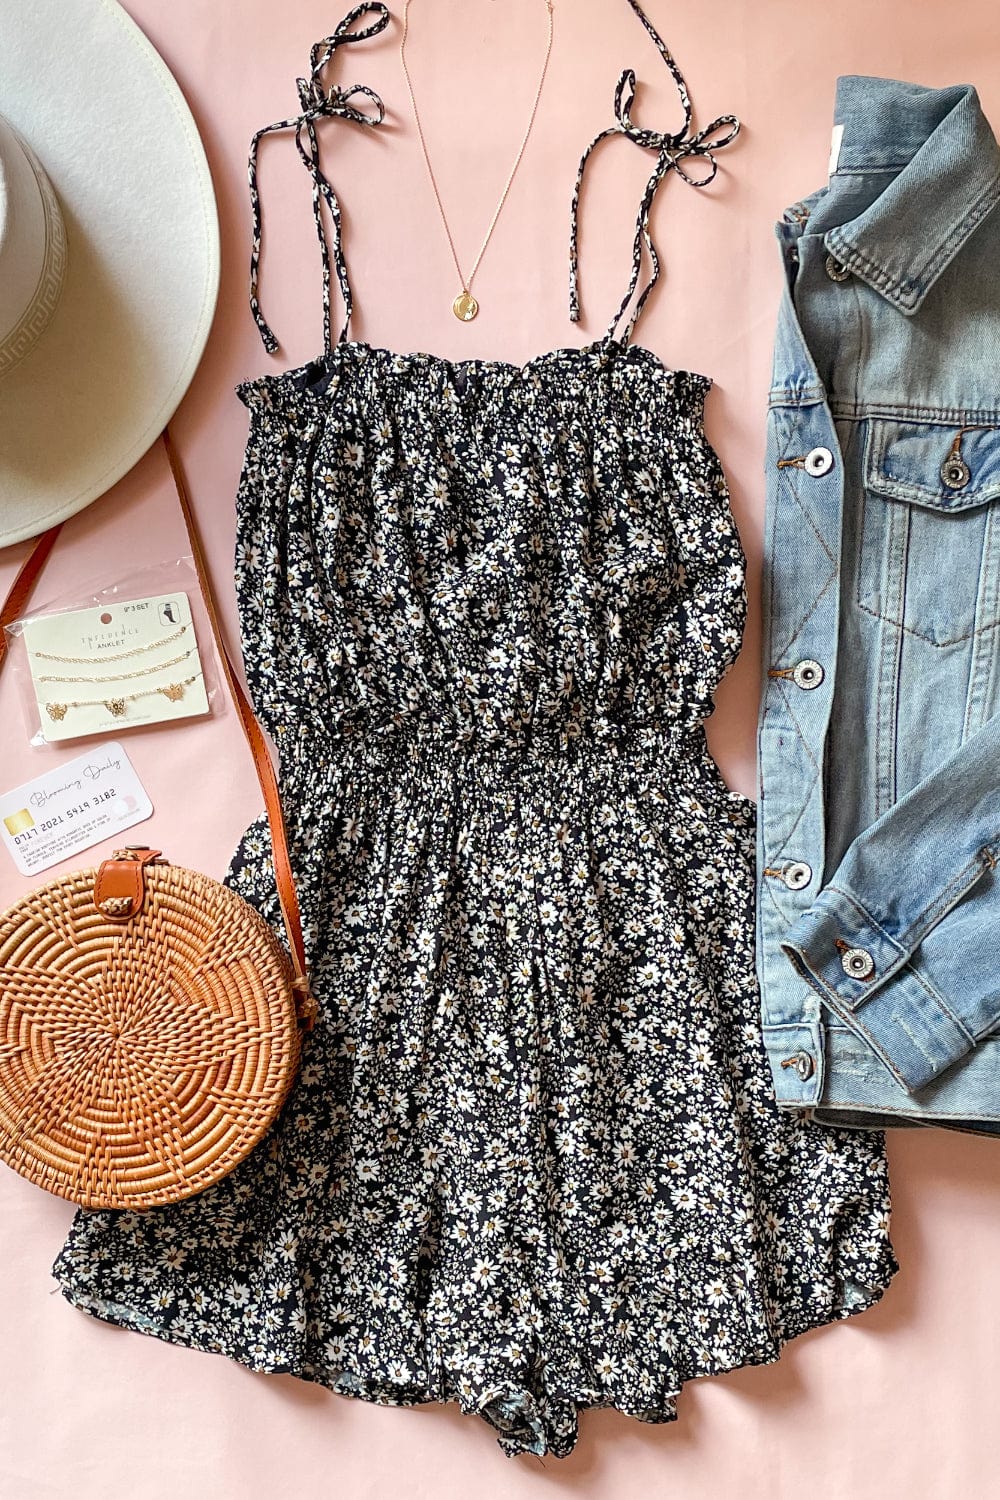 Dainty Daisy Romper - Jumpsuits &amp; Rompers - Blooming Daily